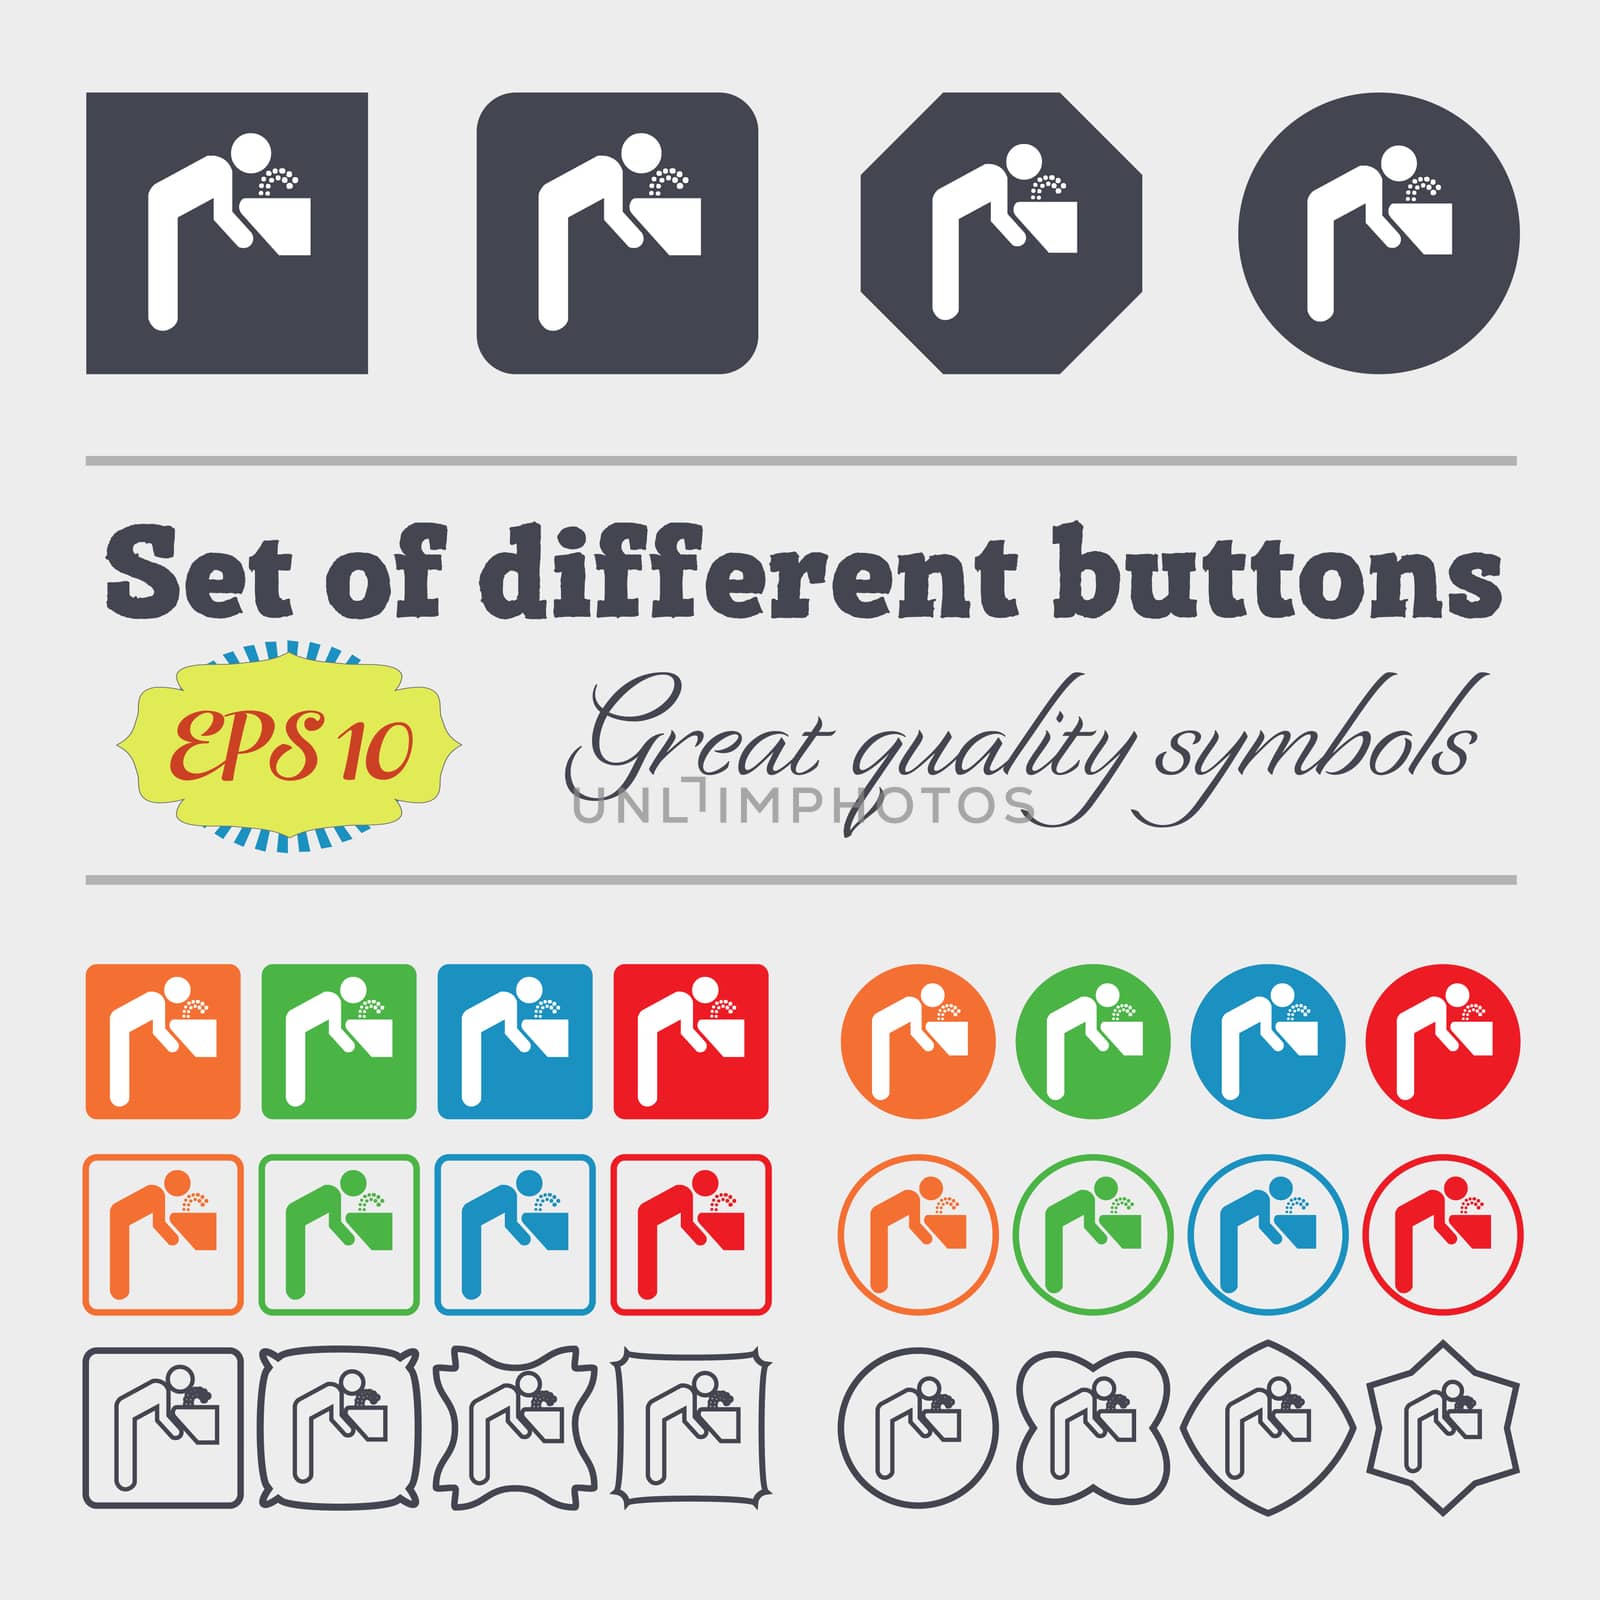 drinking fountain icon sign. Big set of colorful, diverse, high-quality buttons. illustration